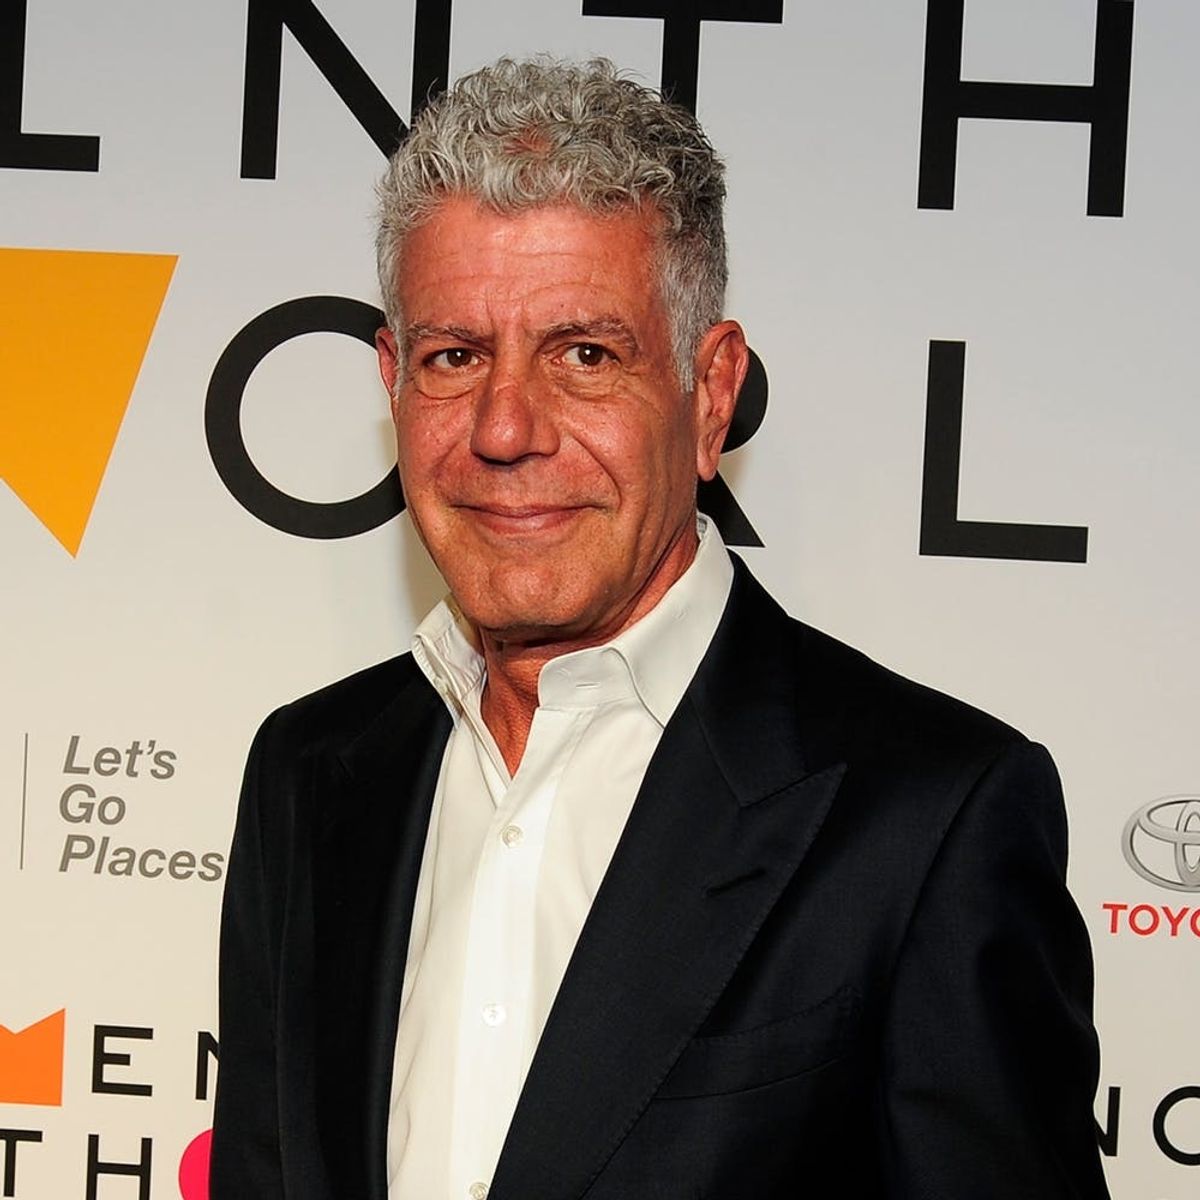 Remembering Anthony Bourdain and His Life’s Mission